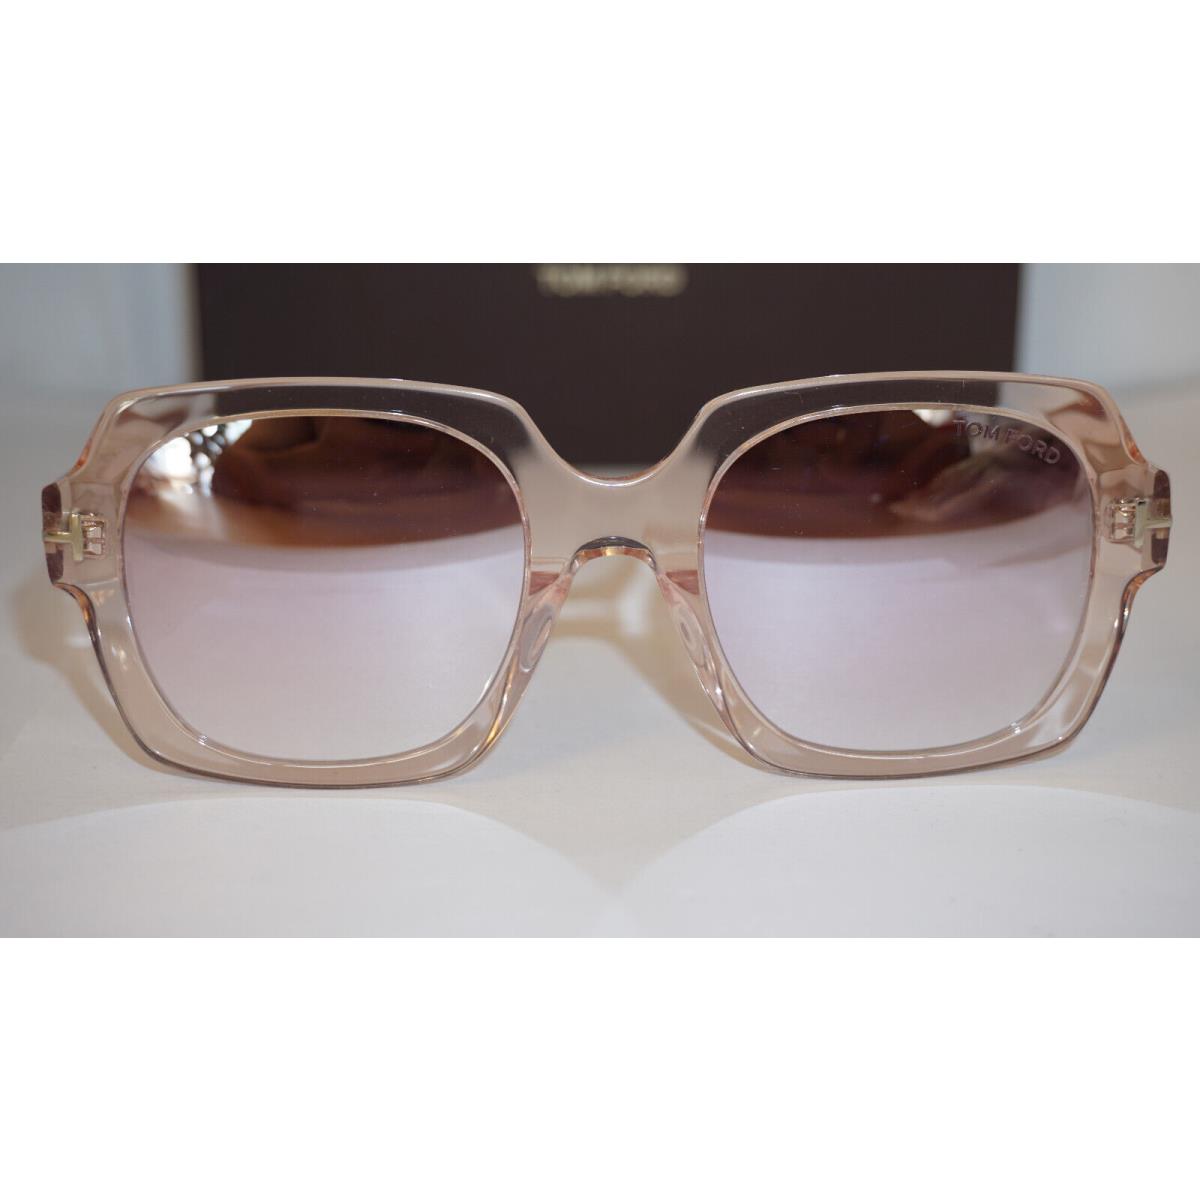 Tom Ford Sunglasses Autumn Pink Transparent Pink TF660 72Z 53 21 140